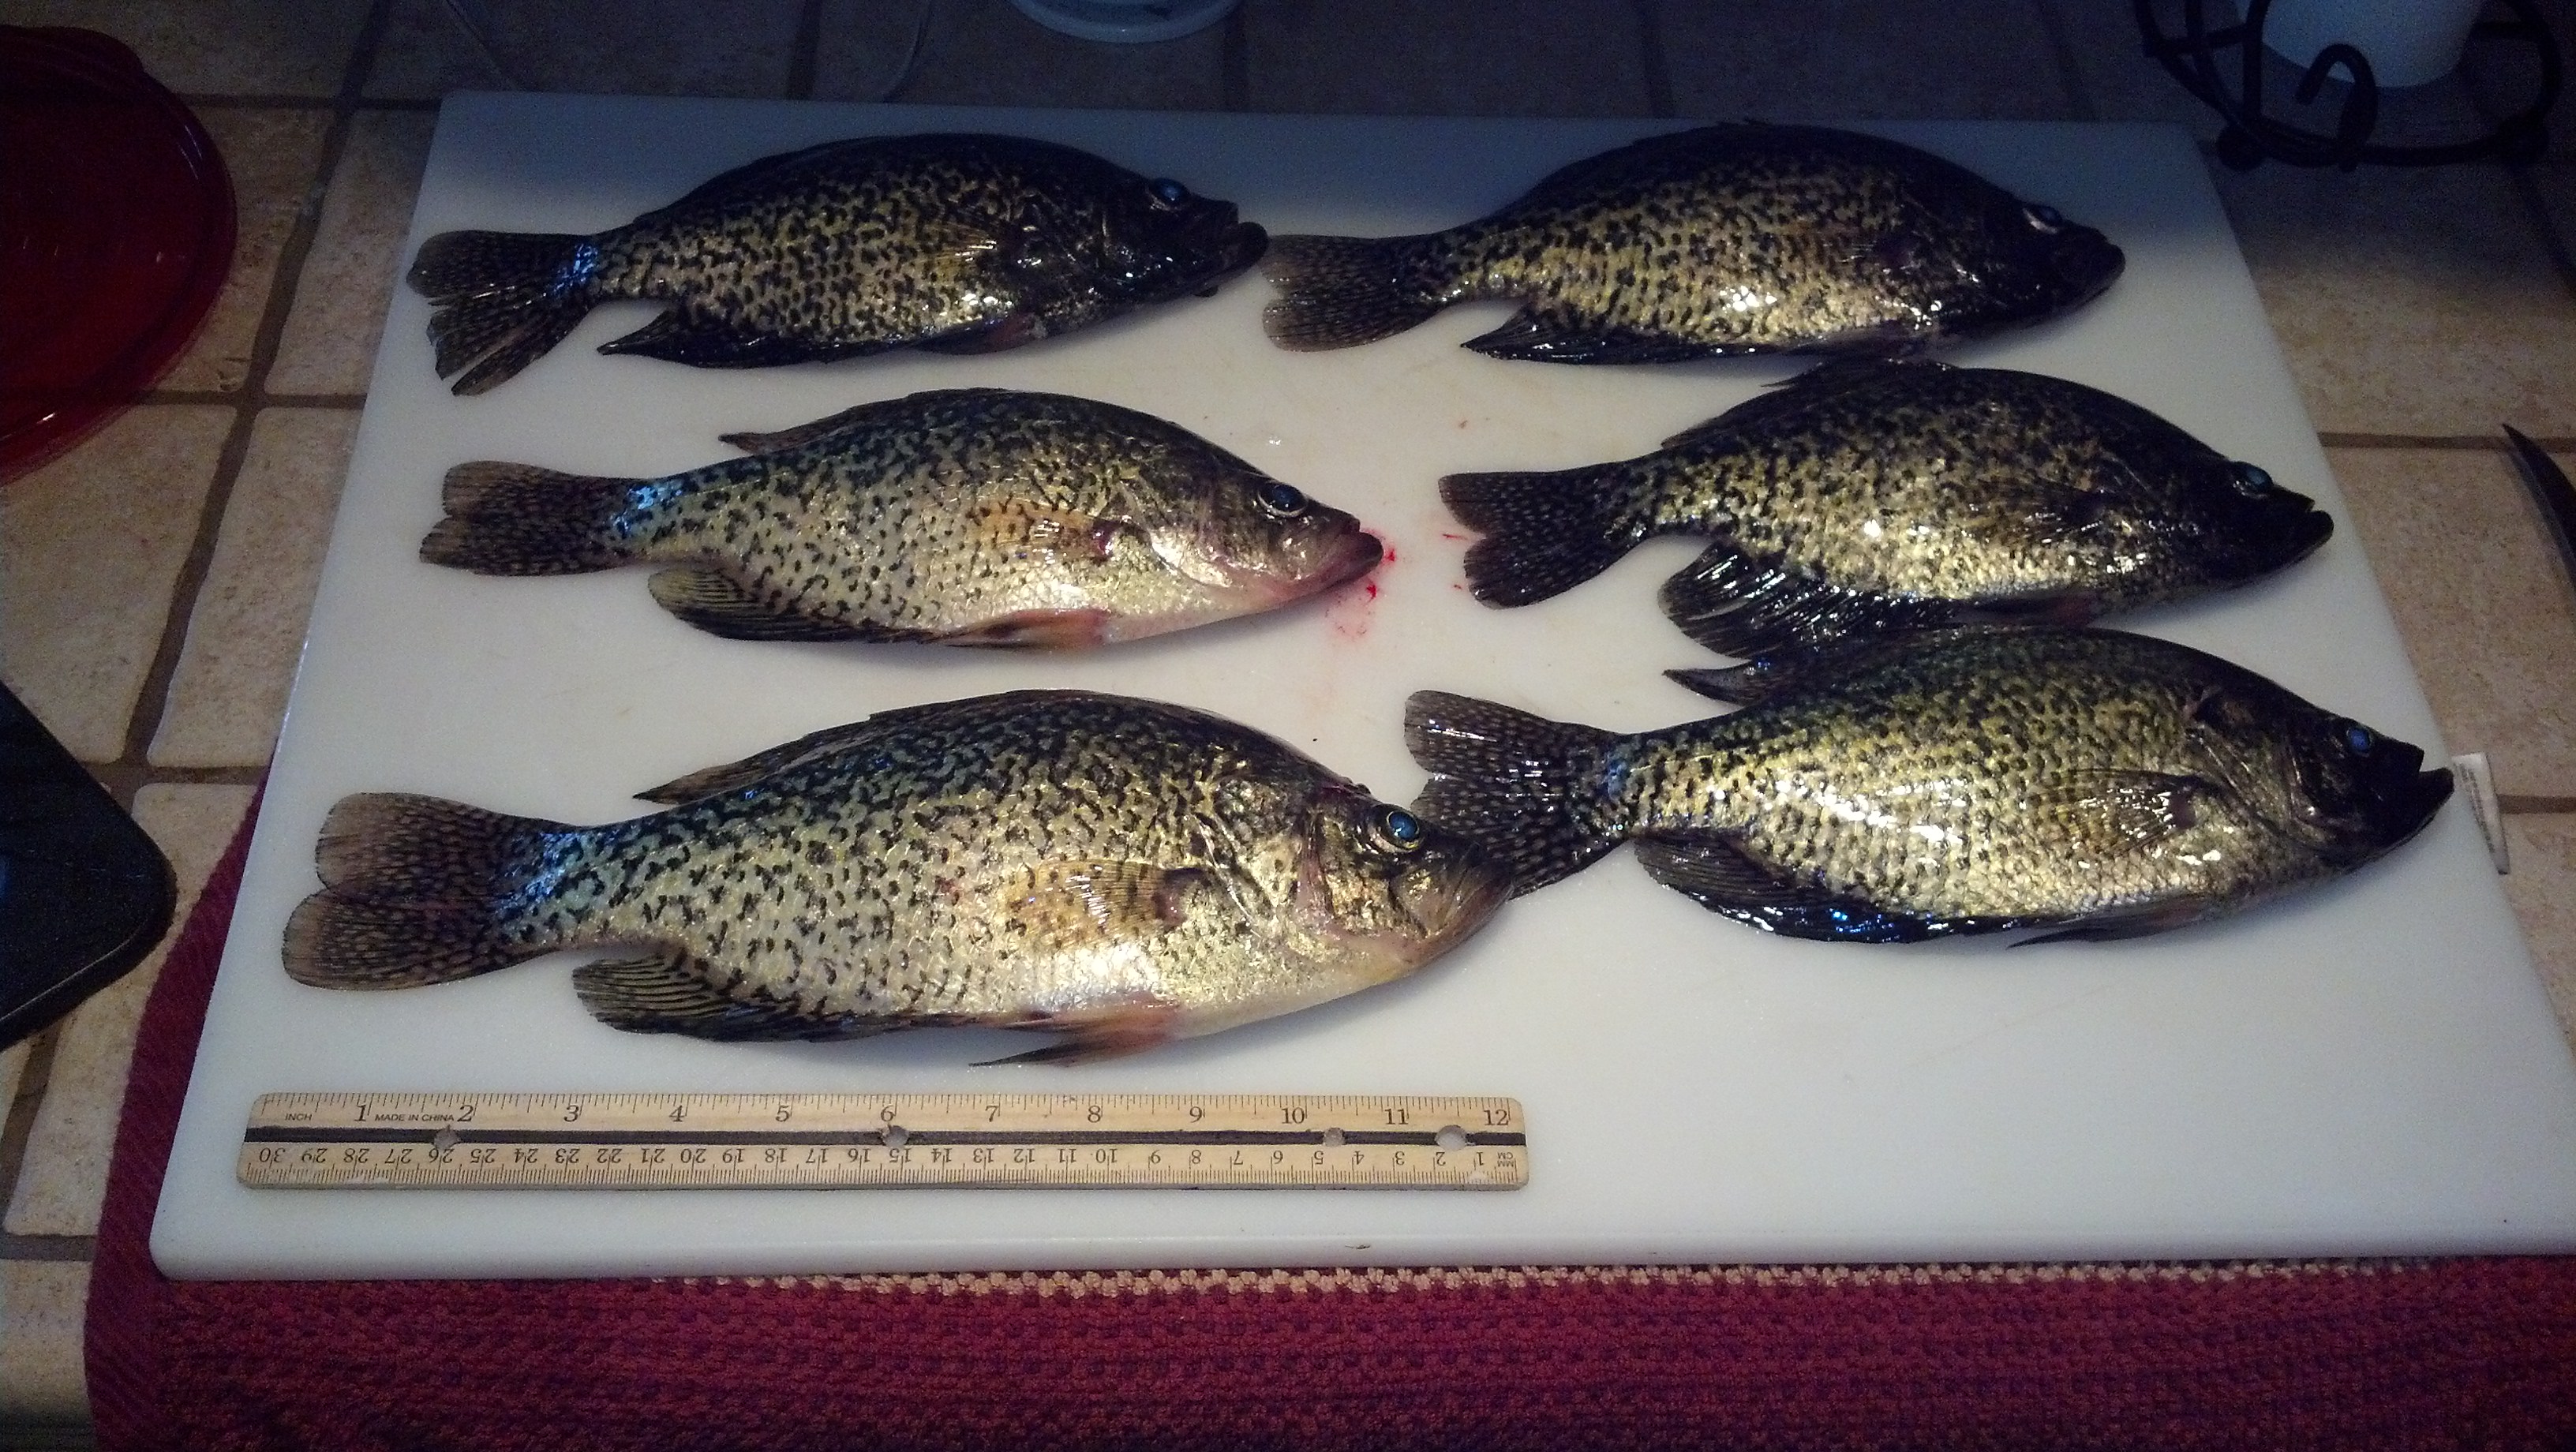 Strike while it's hot! There are lots of crappie at C.J. Strike